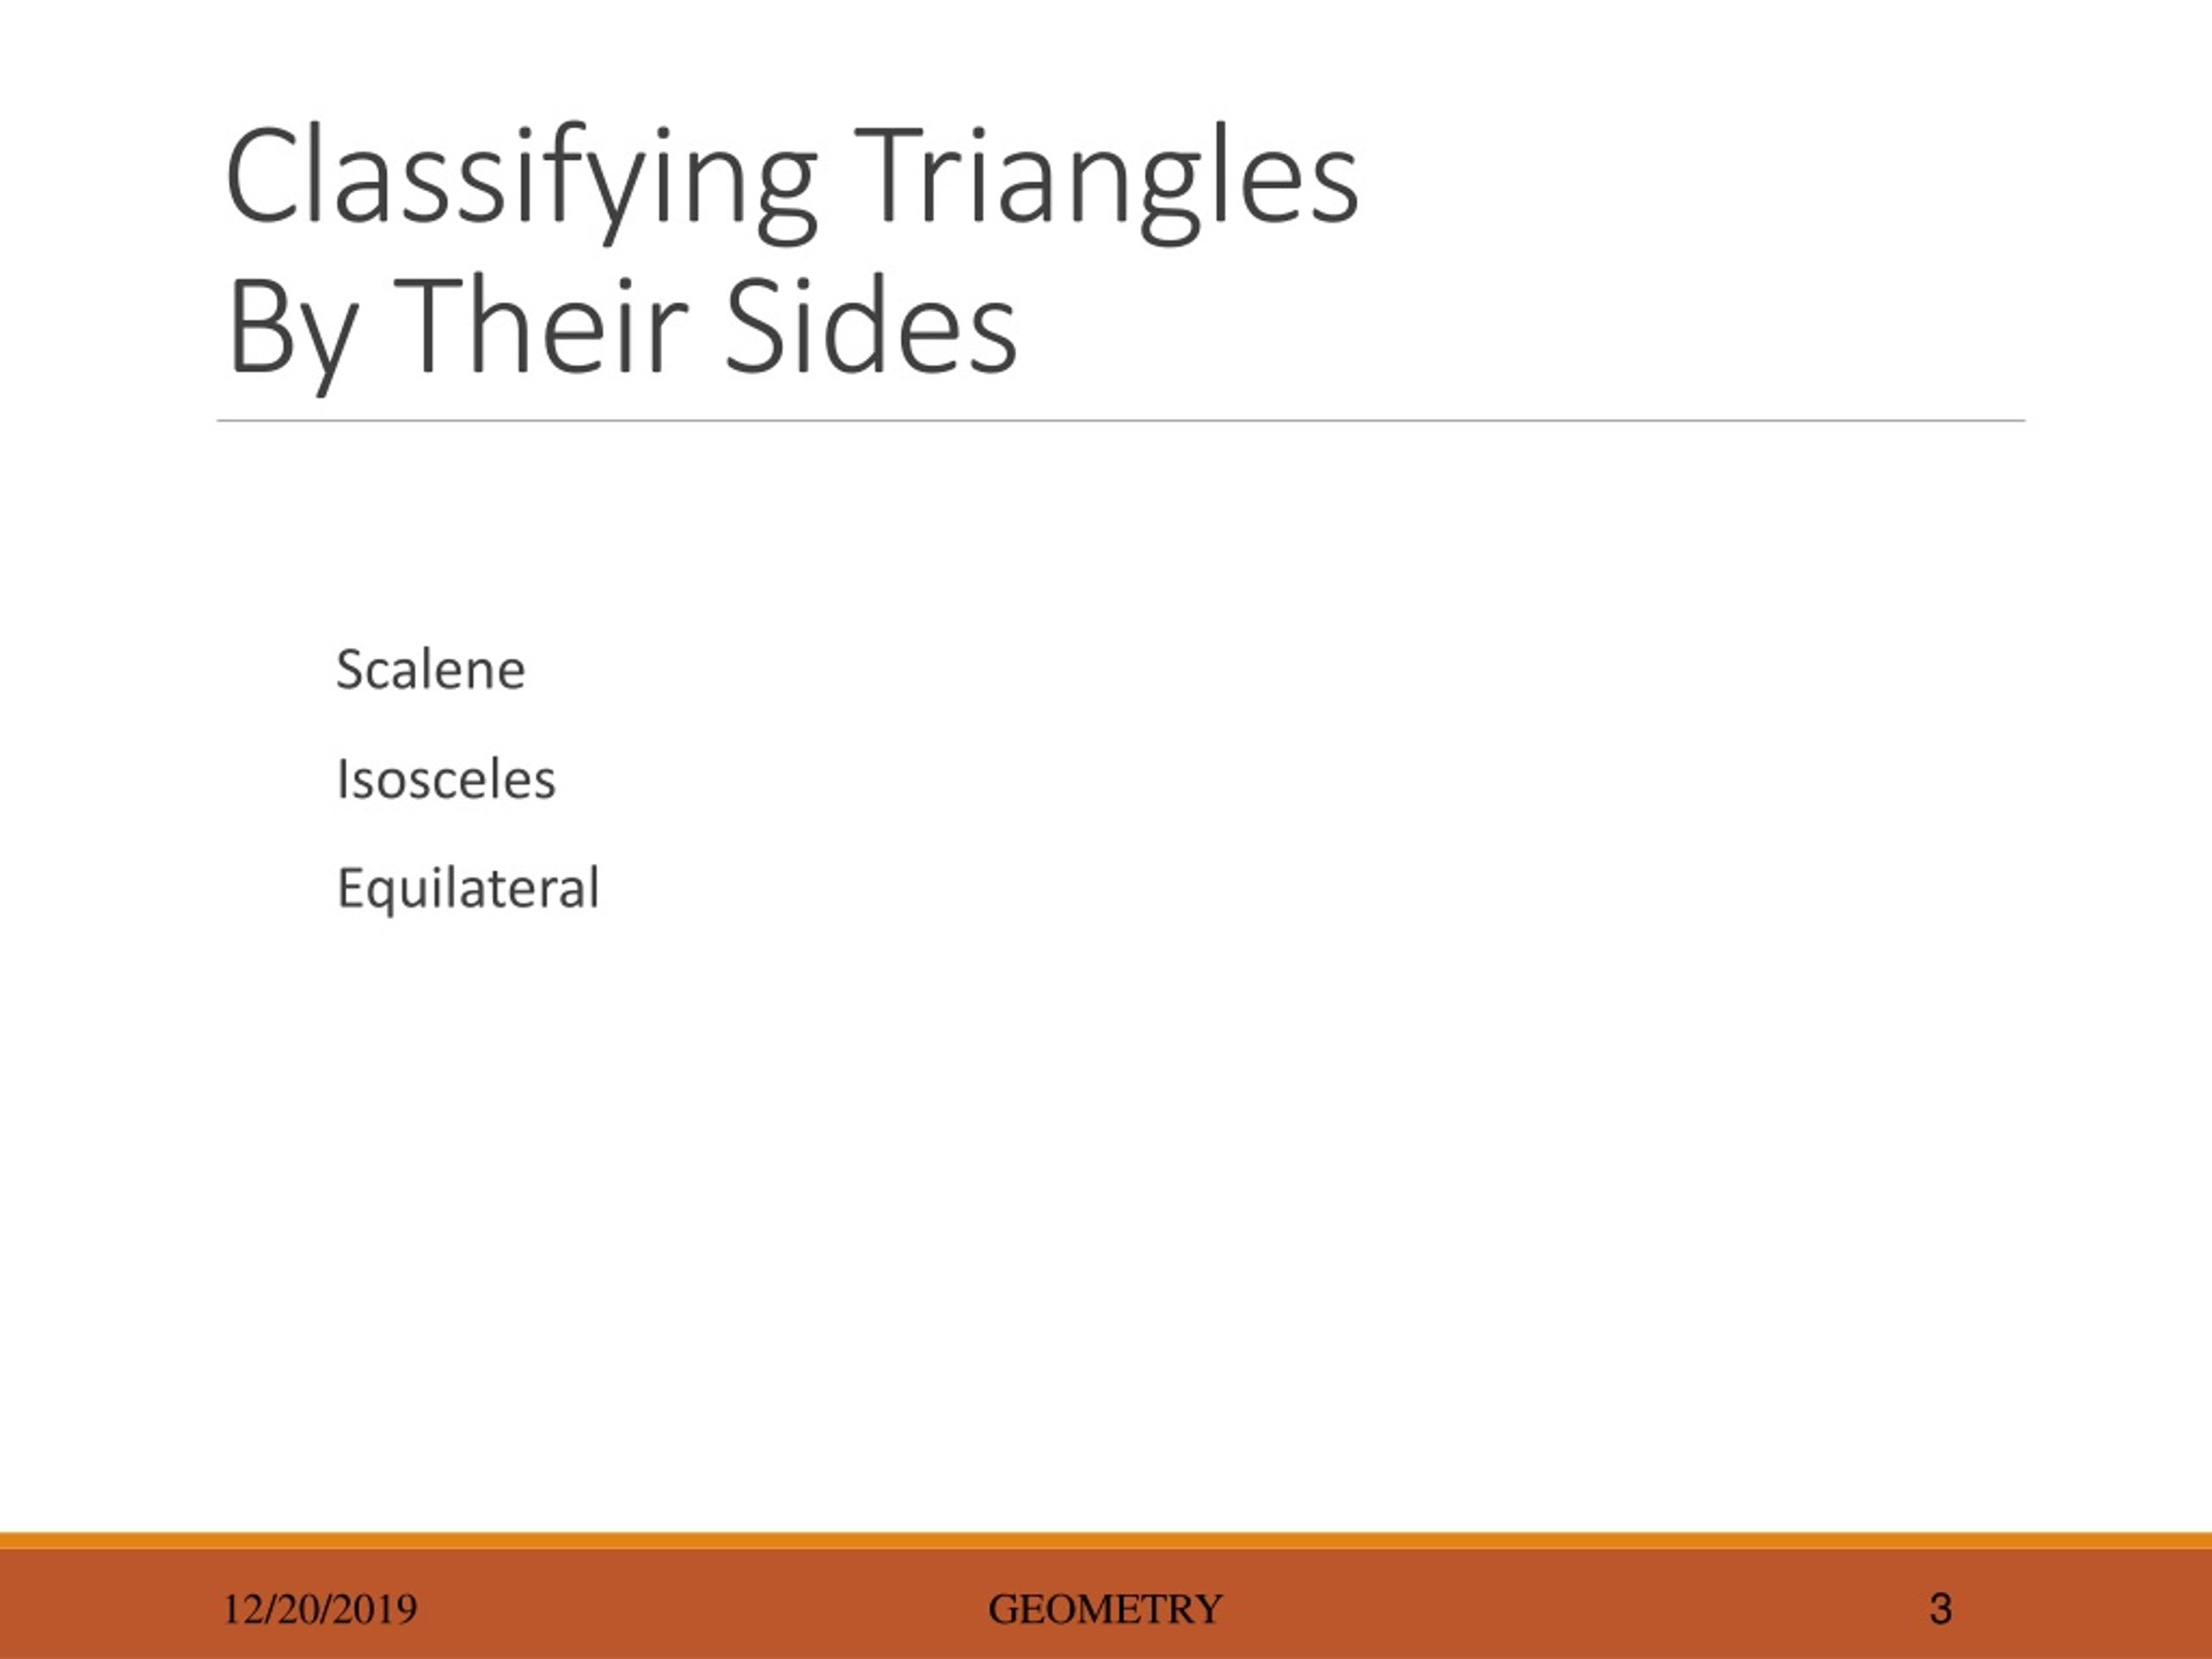 Ppt Classifying Triangles Powerpoint Presentation Free Download Id9196447 2605